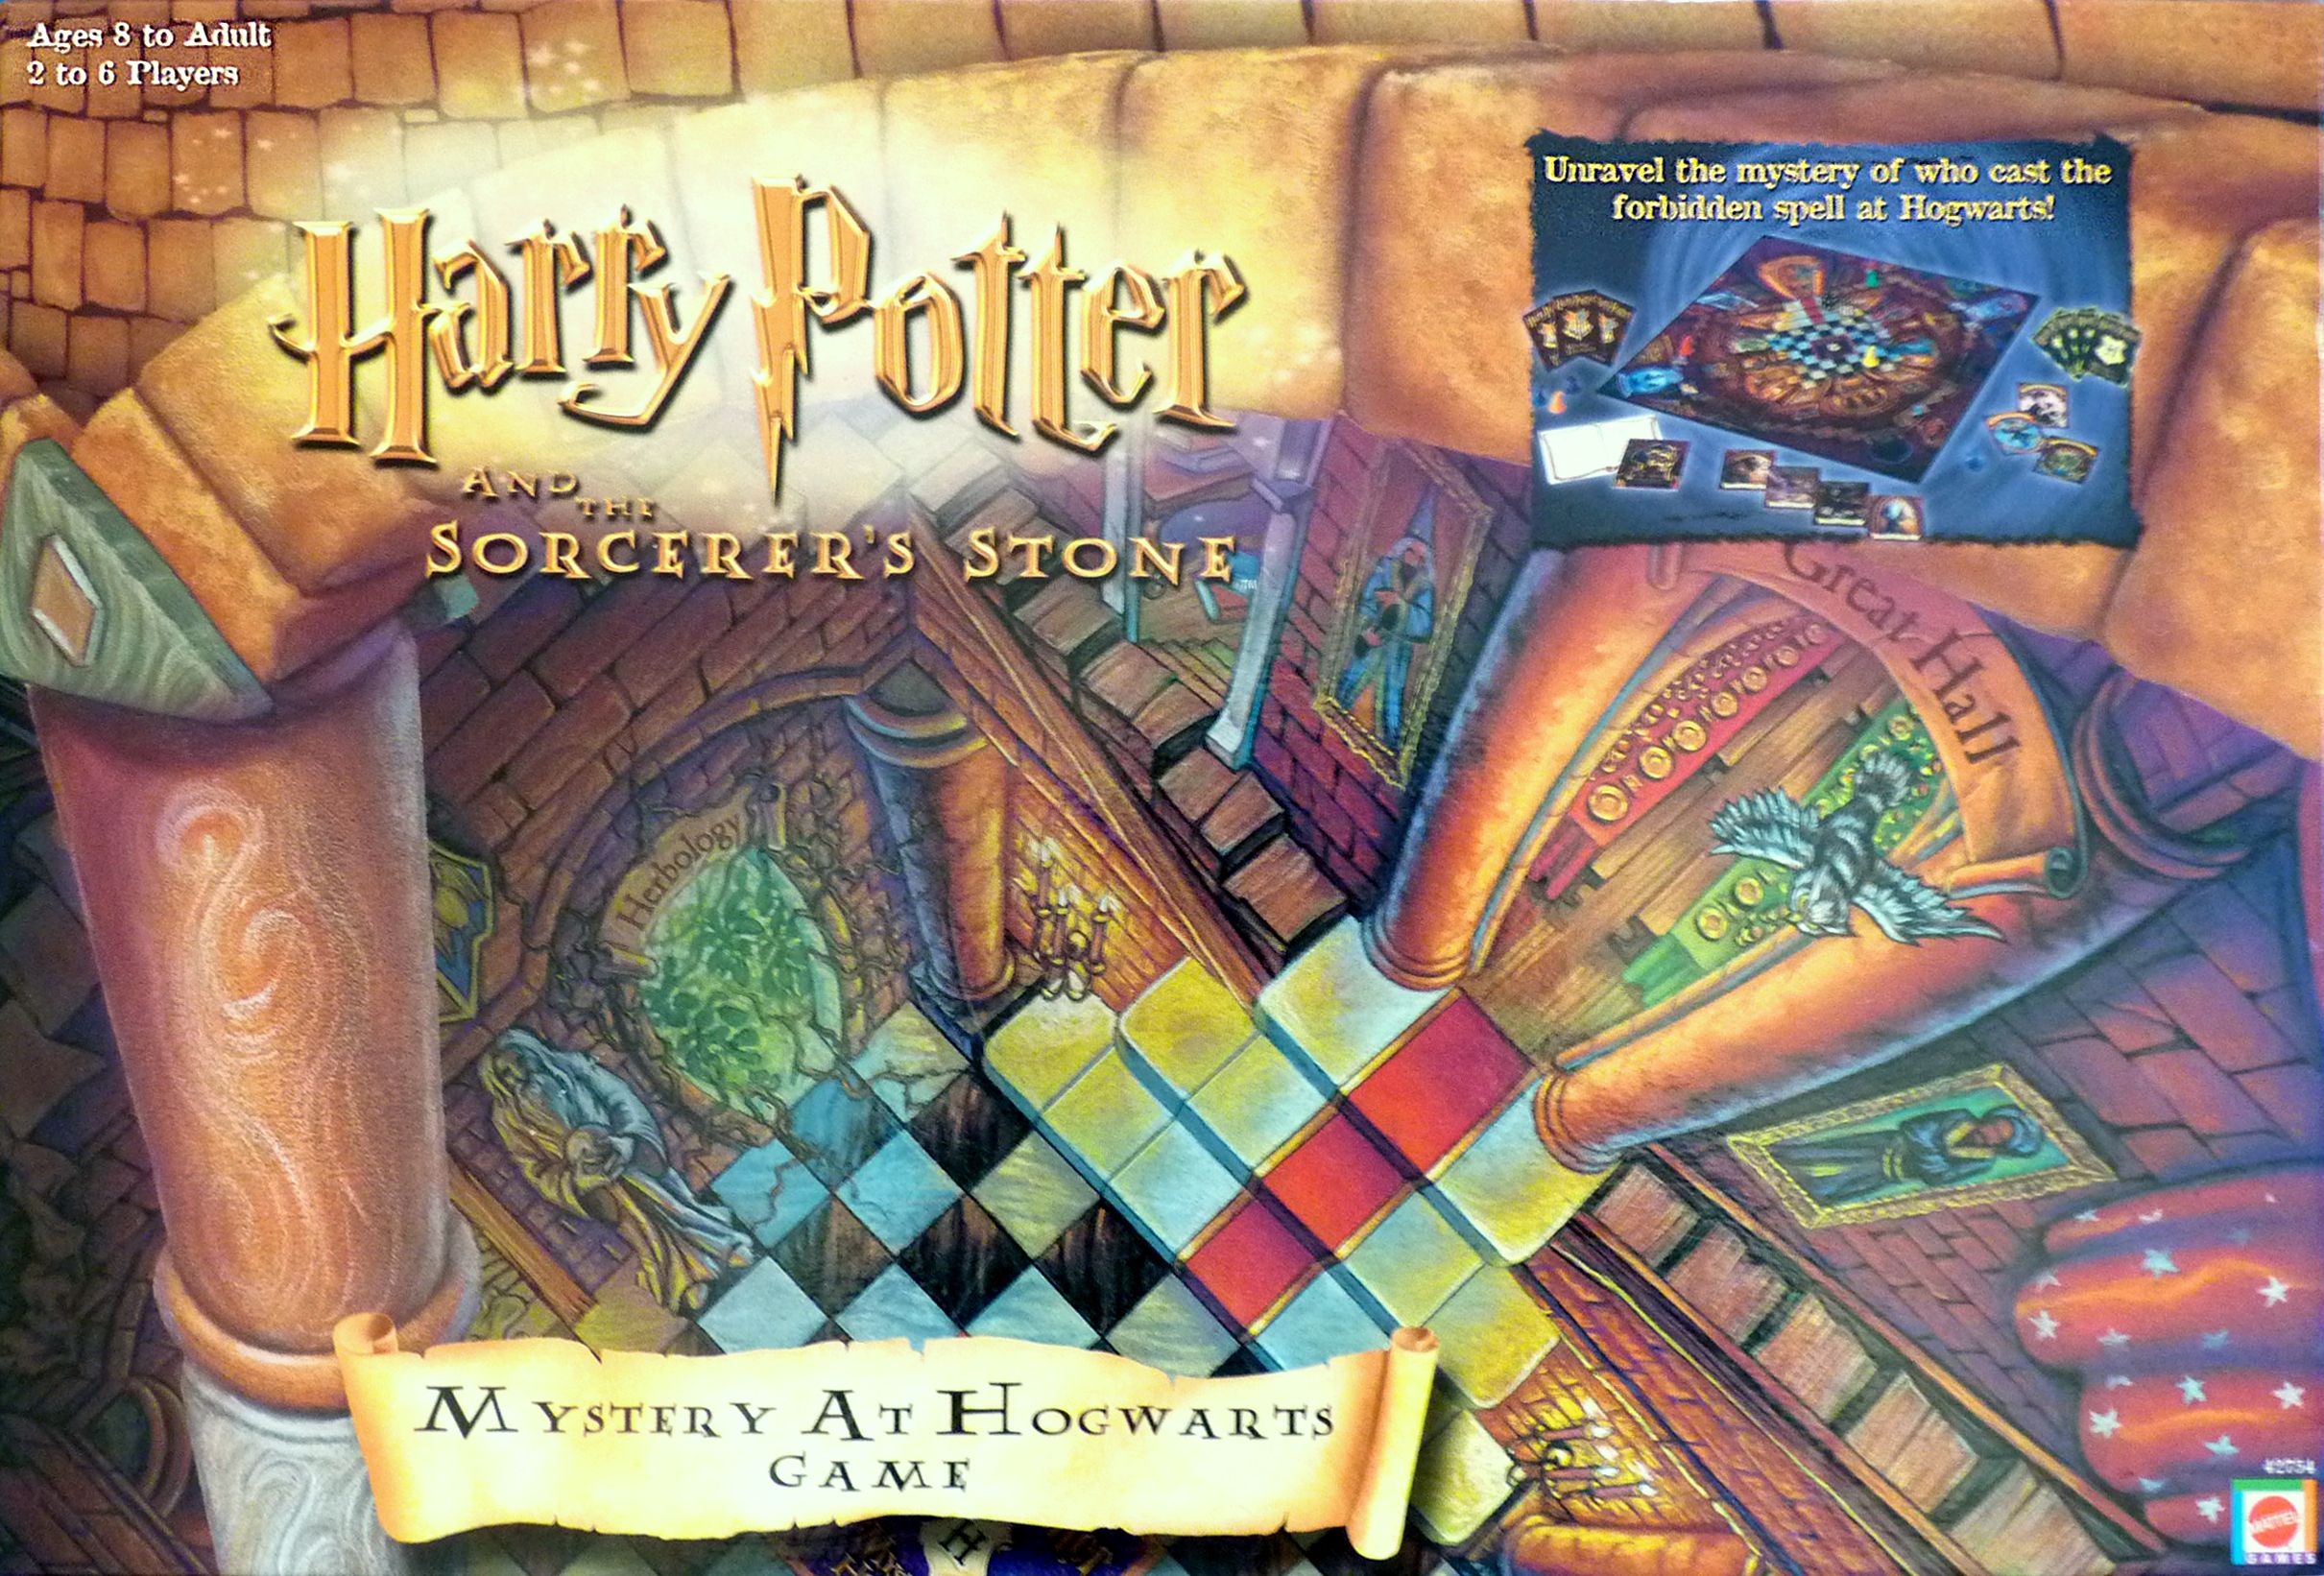 Harry Potter and the Sorcerer's Stone   Mystery at Hogwarts Game